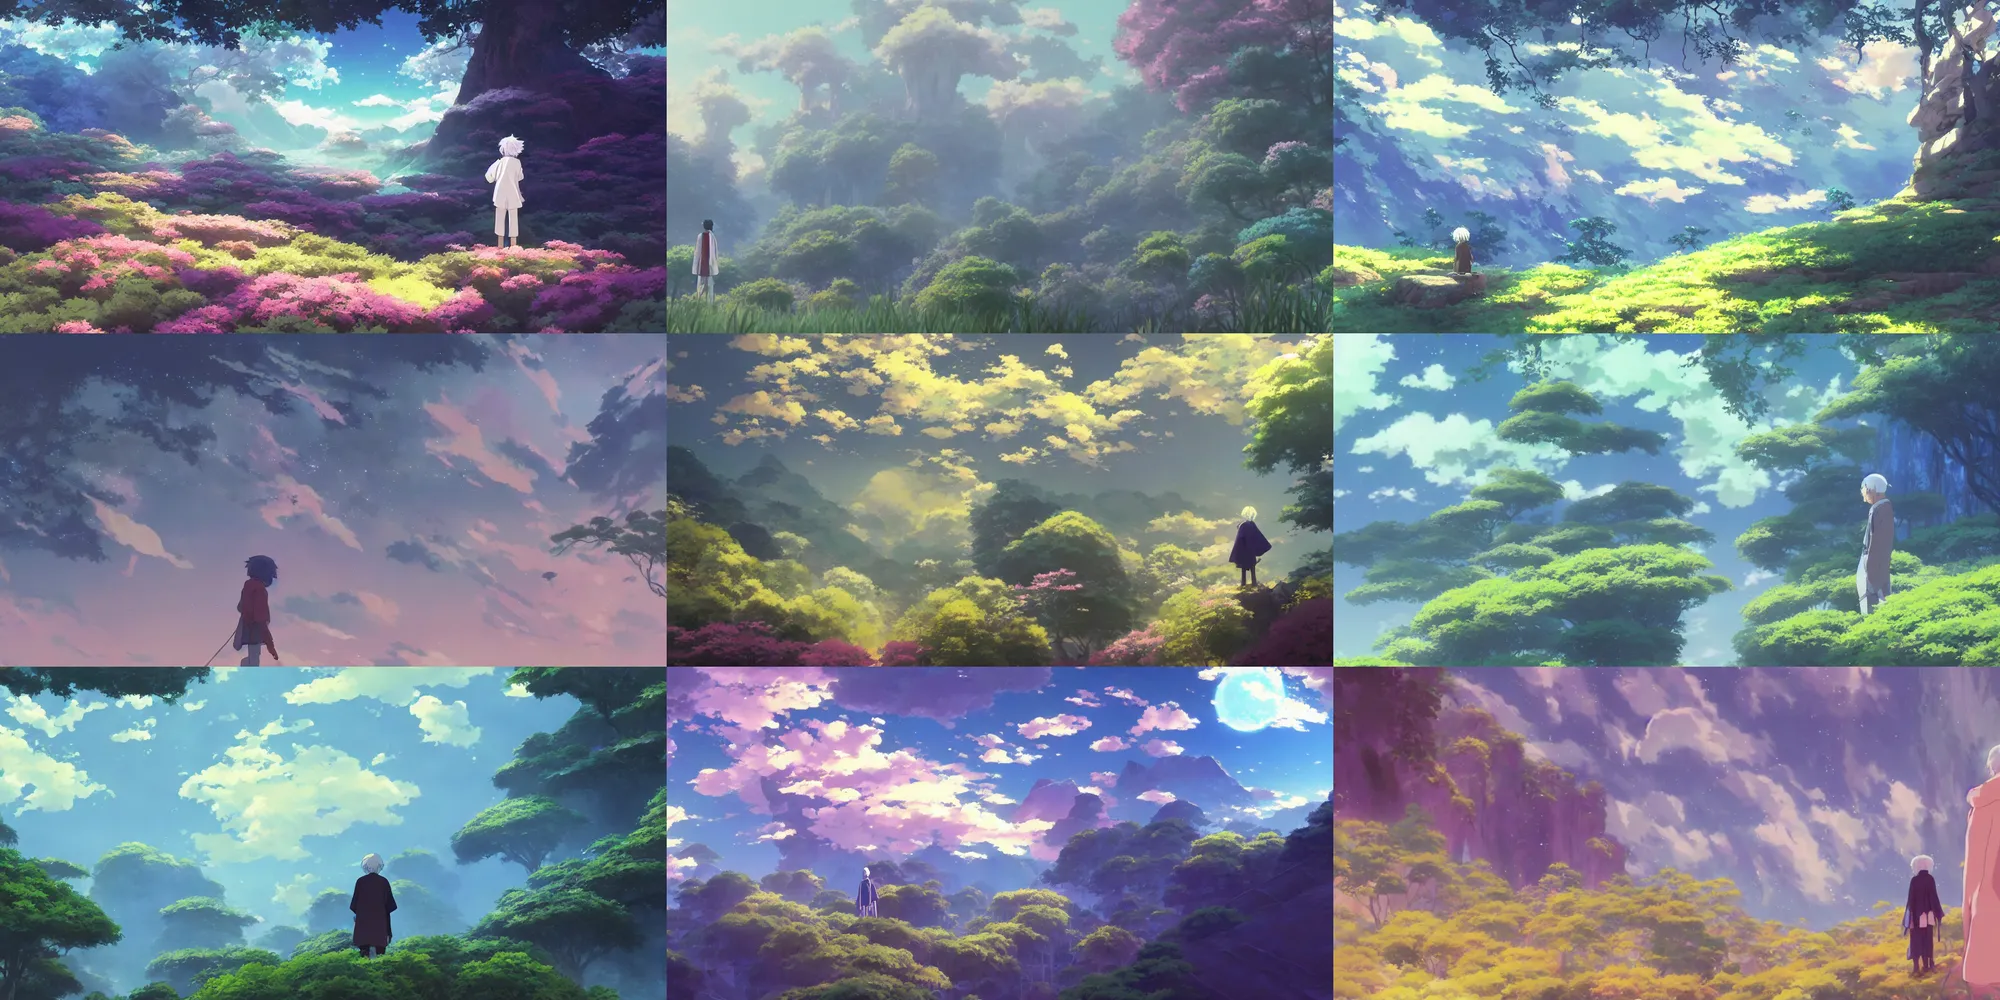 Prompt: painting of a dreamscape, an anime grandpa on a mystical action adventure, otherworldly and ethereal by kazuo oga in the anime film by studio ghibli, screenshot from the anime film by makoto shinkai, concept art by senior environment artist, anime aesthetic